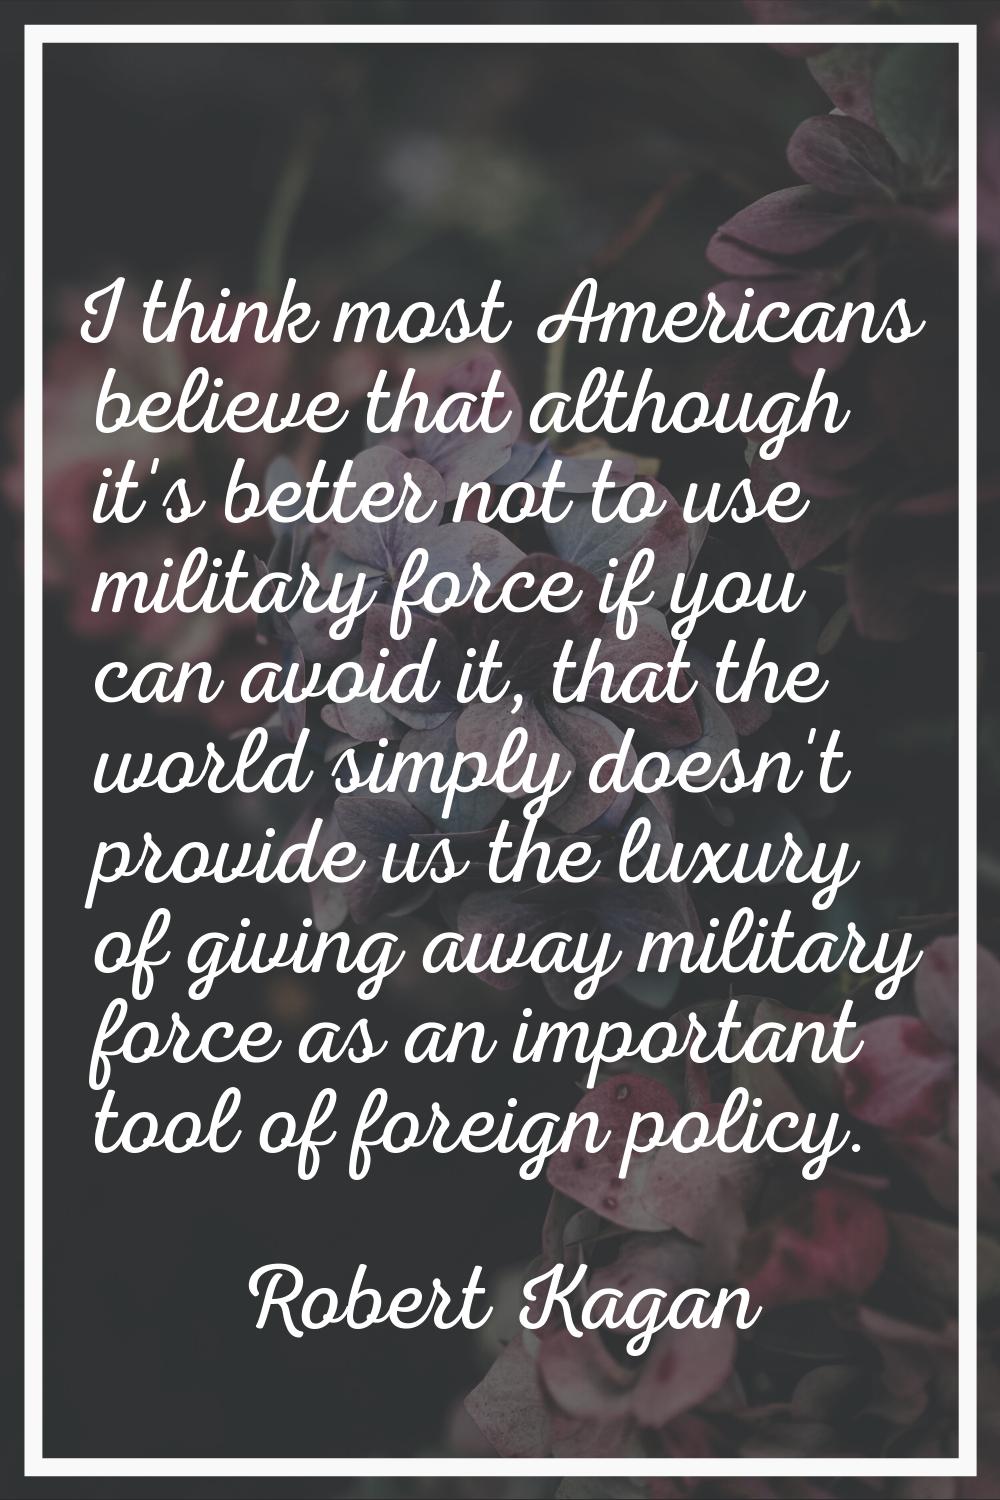 I think most Americans believe that although it's better not to use military force if you can avoid